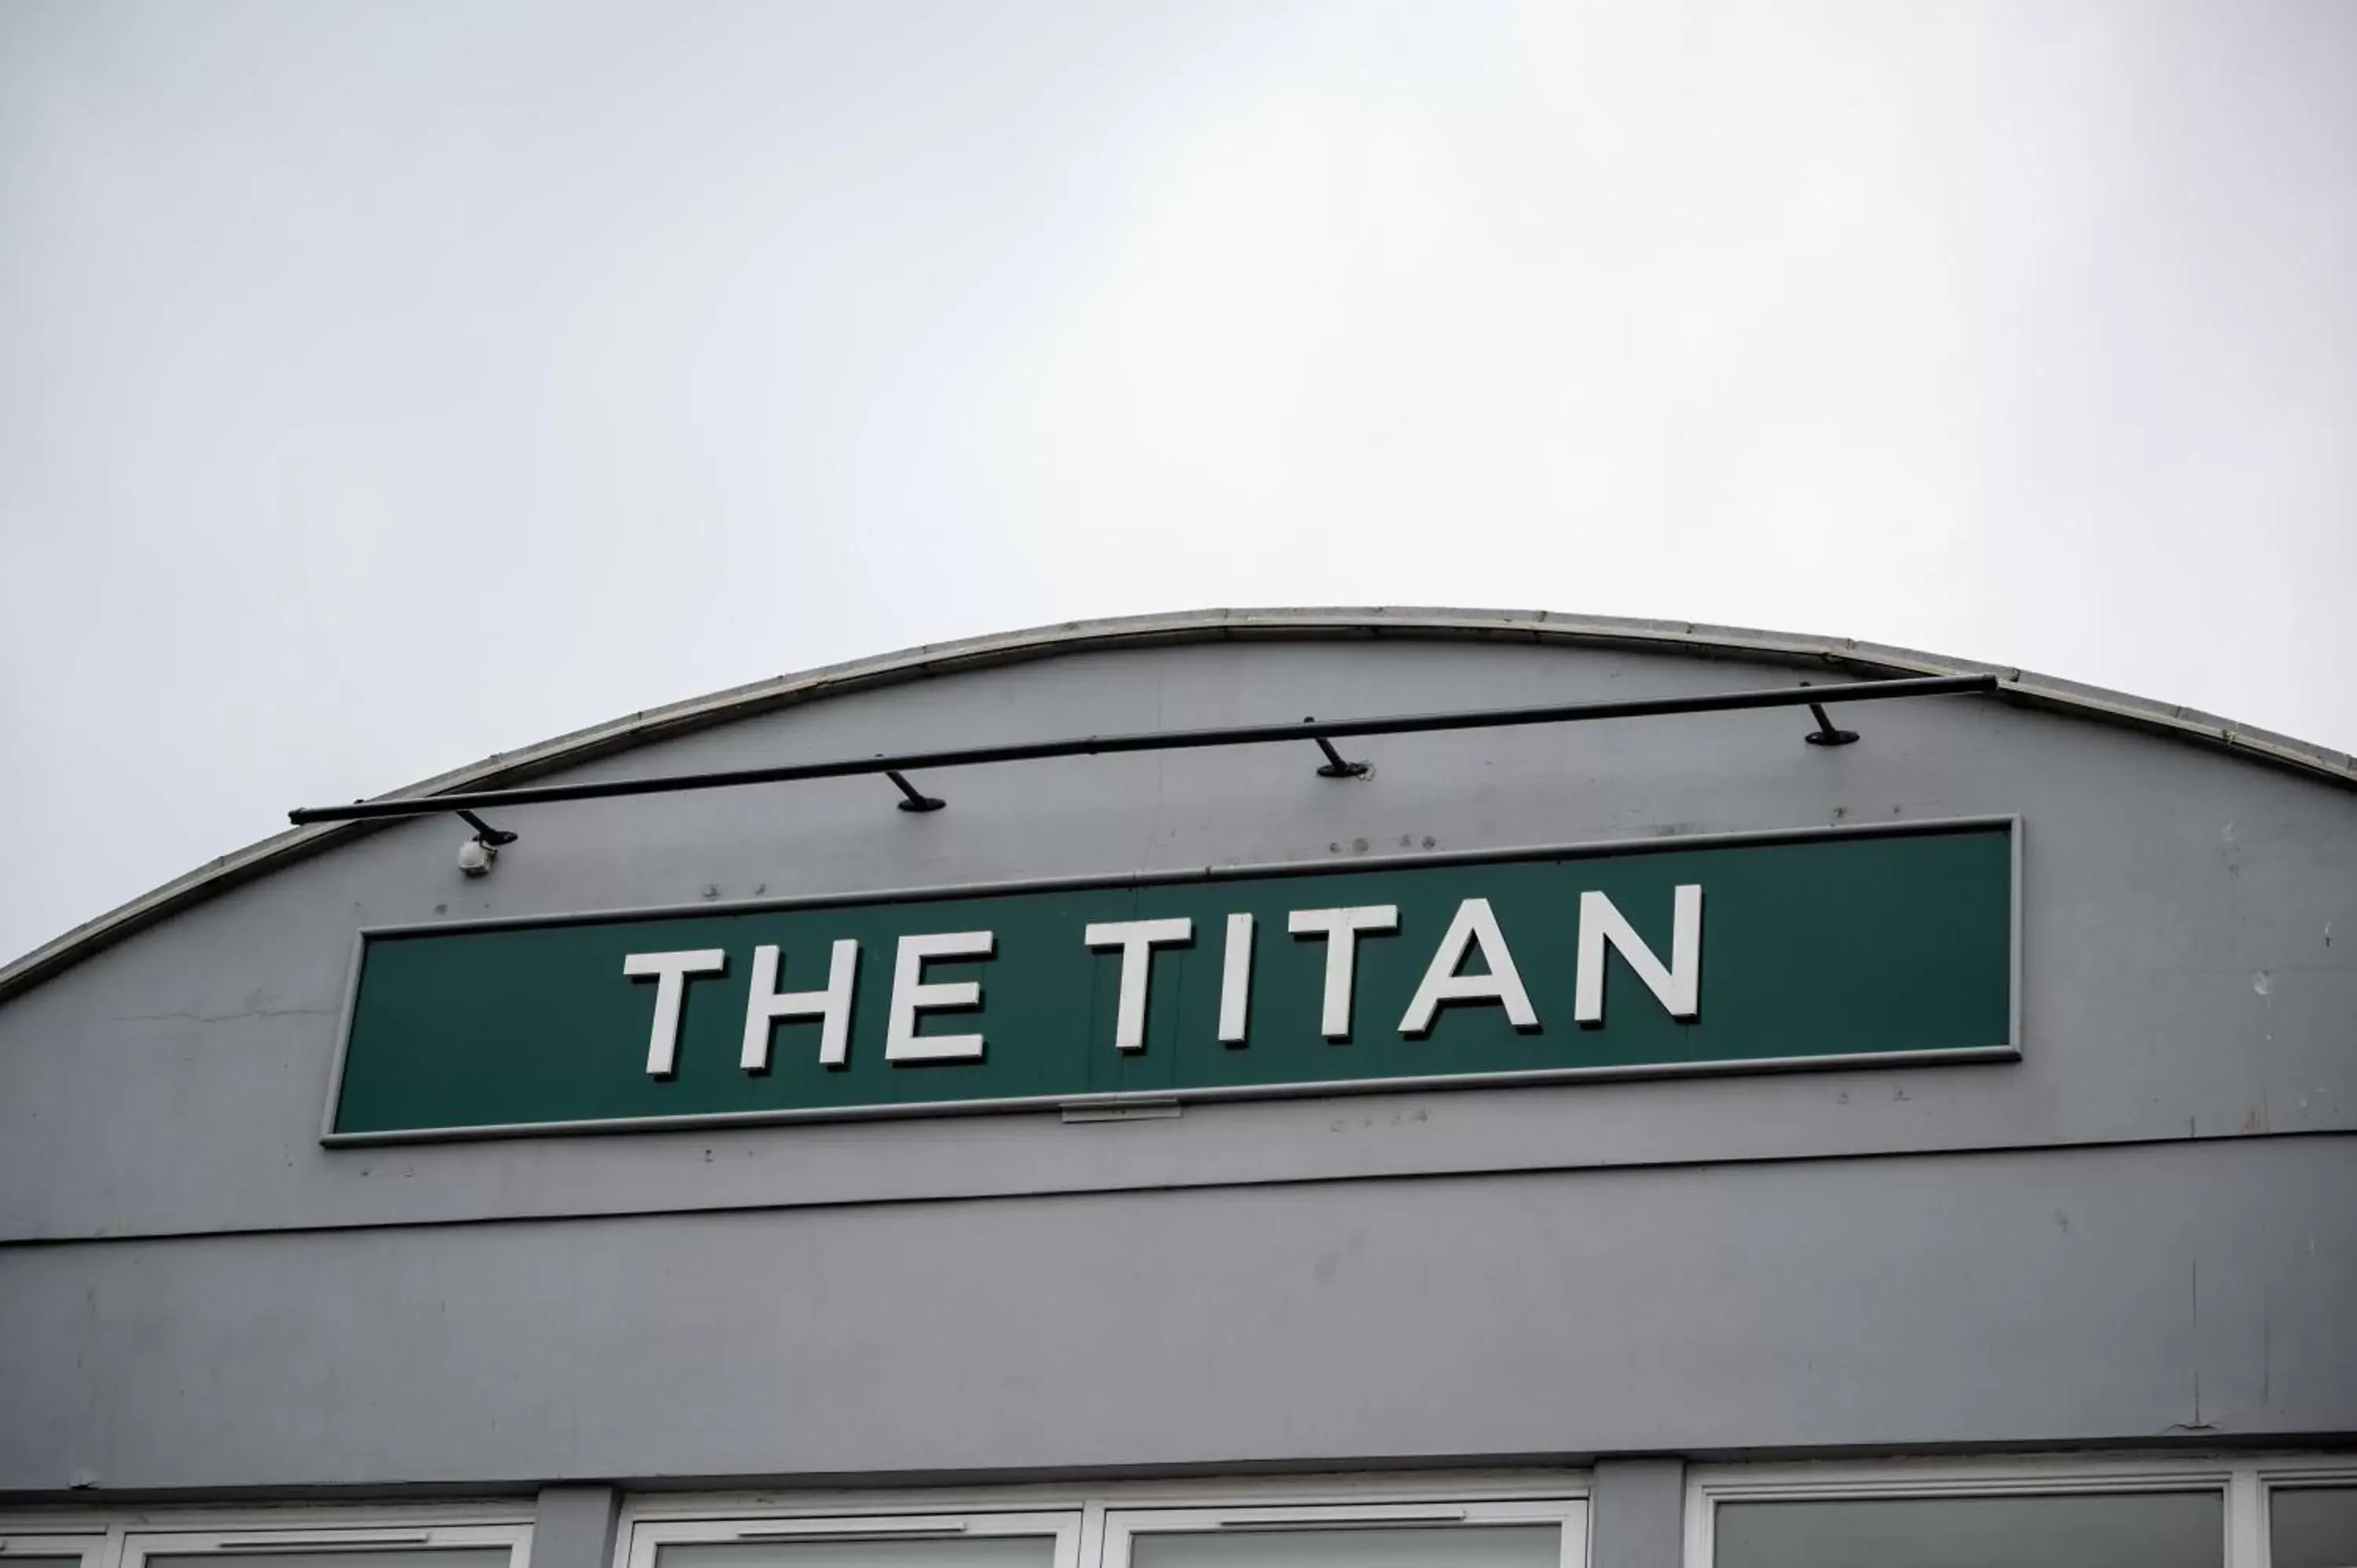 Logo/Certificate/Sign, Property Building in The Titan